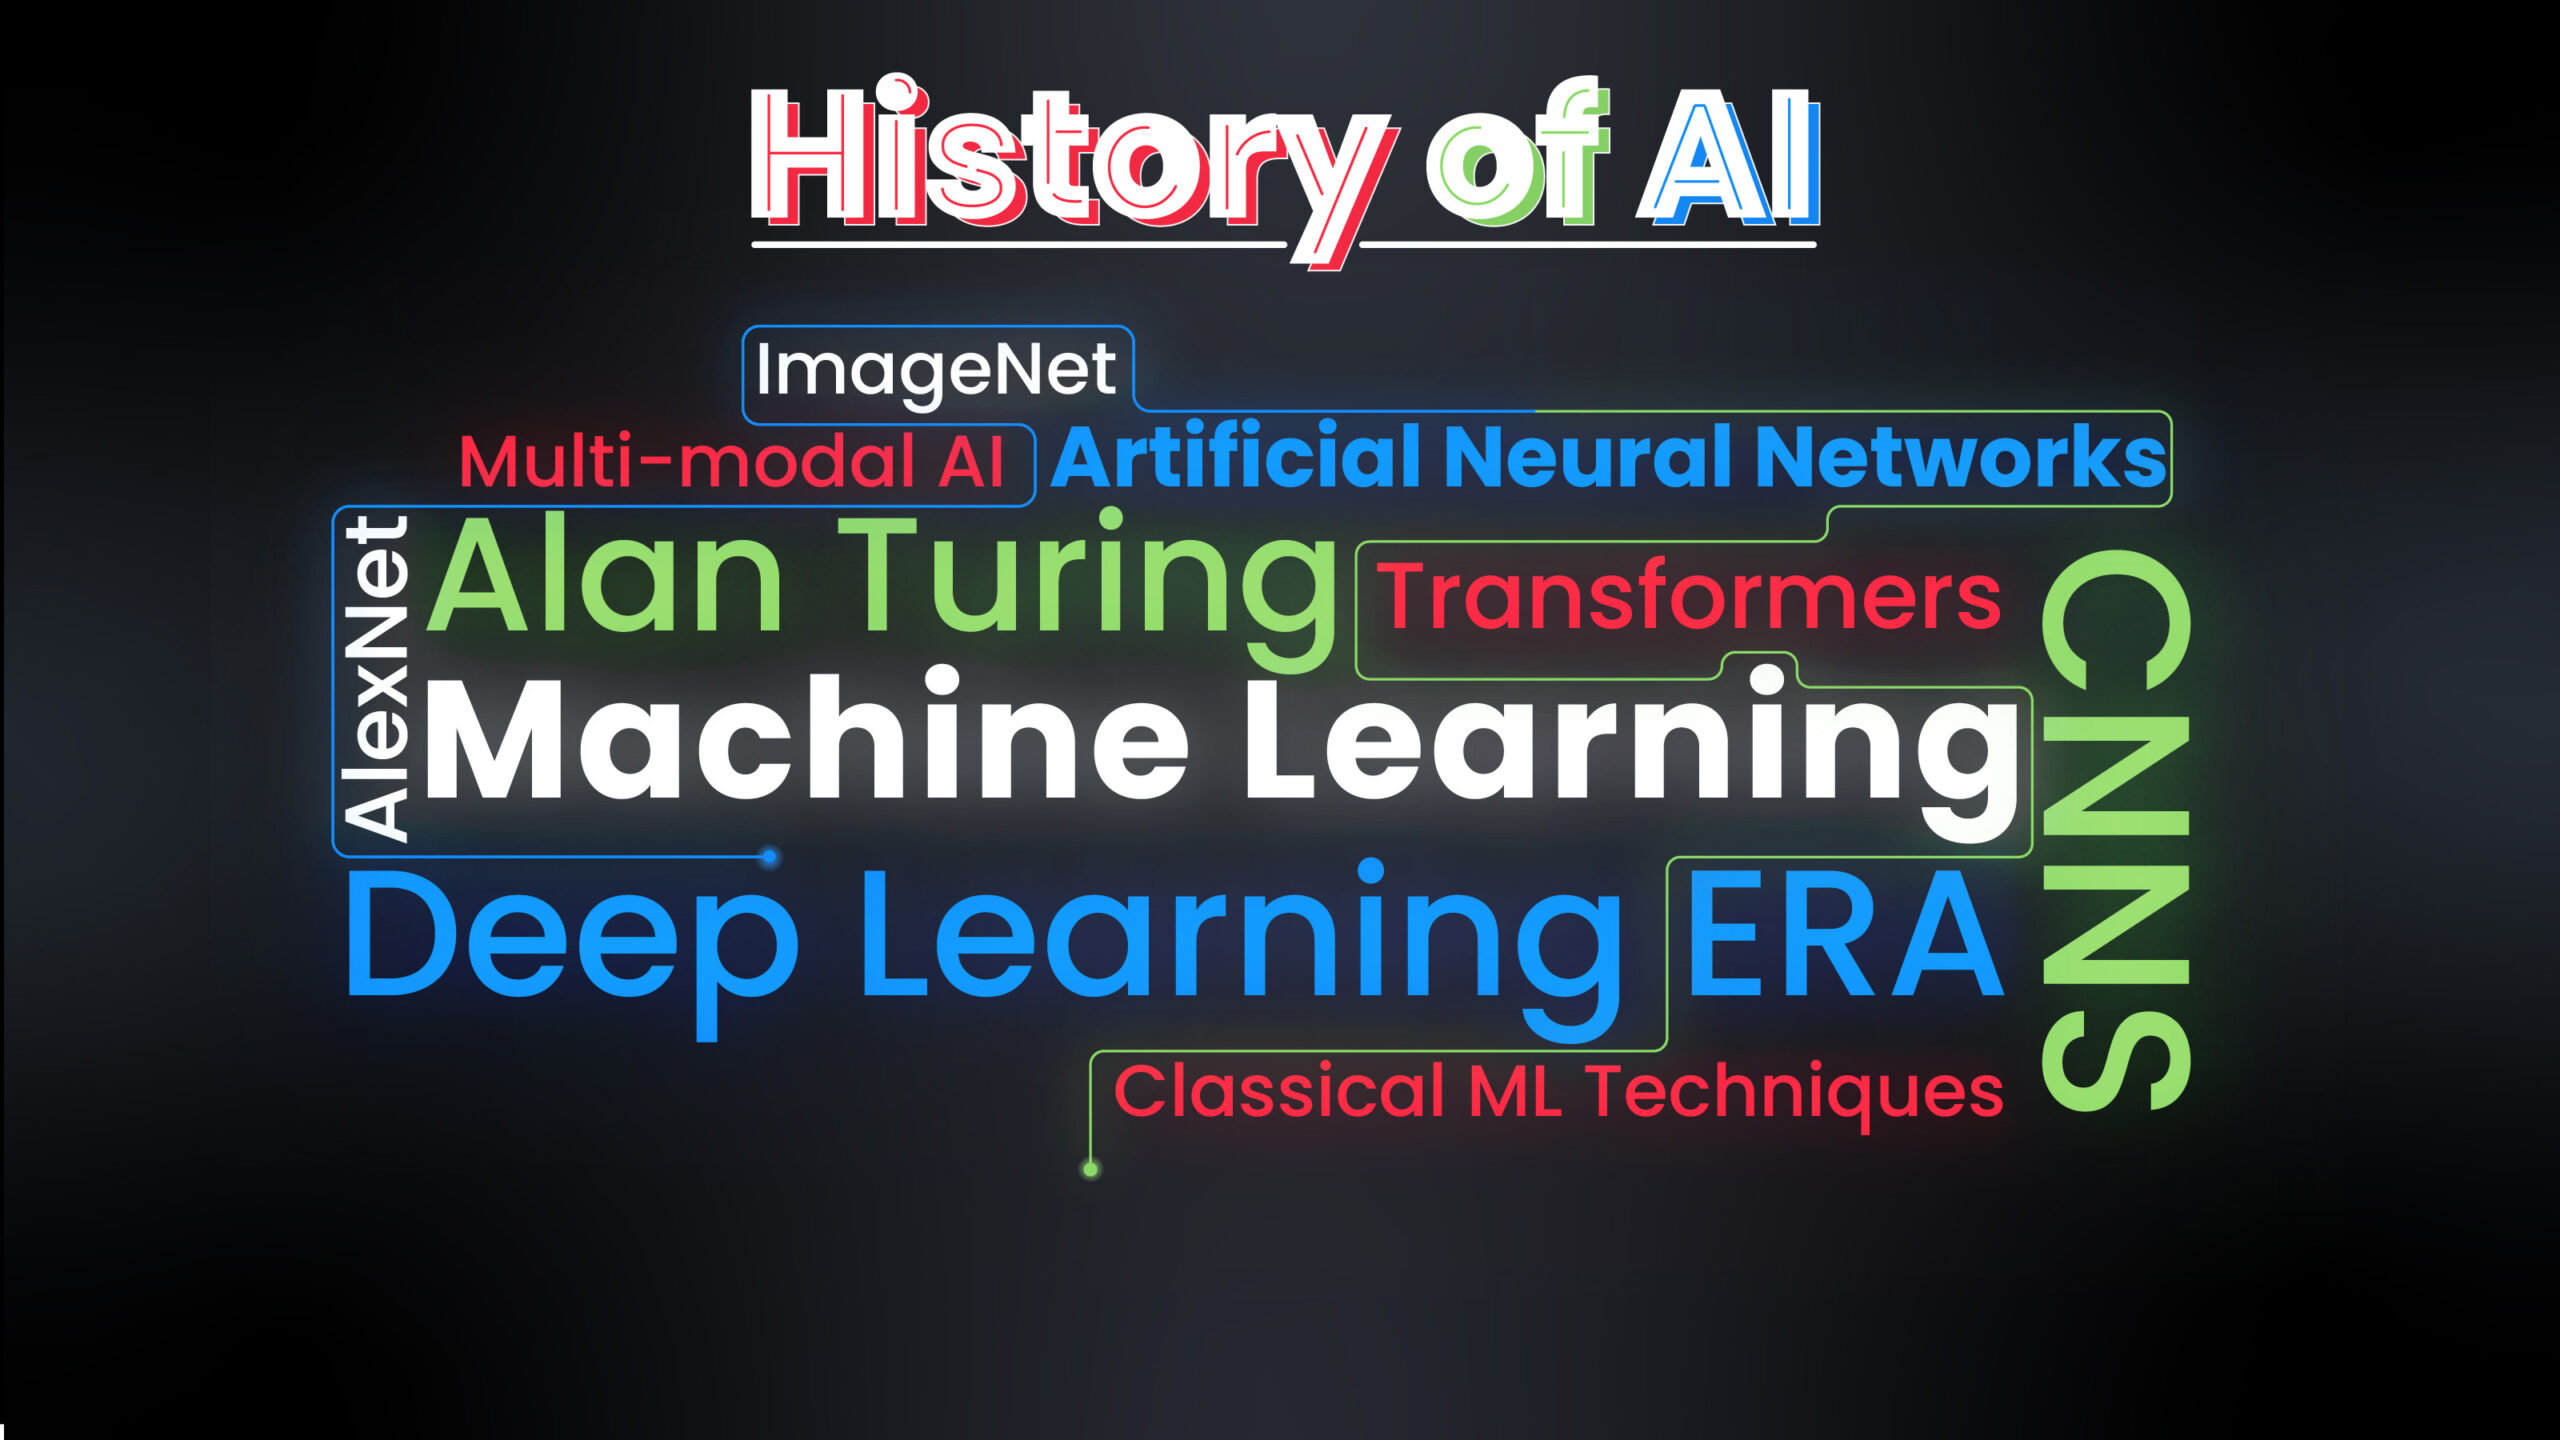 Knowing the history of AI is important in understanding where AI is now and where it may go in the future.